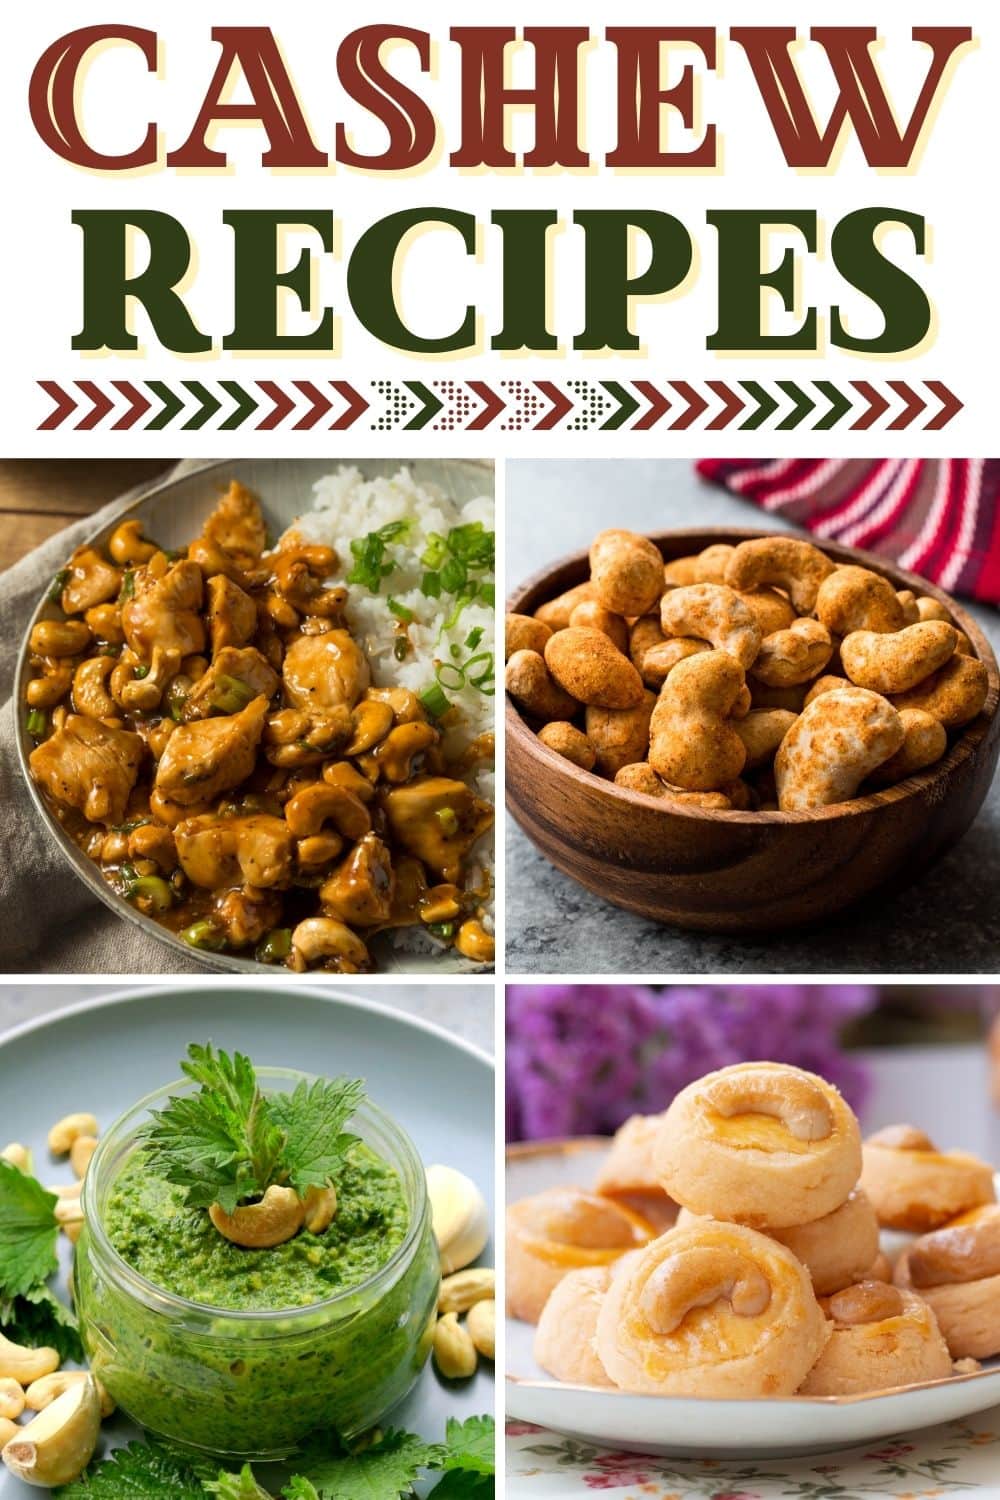 20 Best Cashew Recipes You’ll Go Nuts Over - Insanely Good